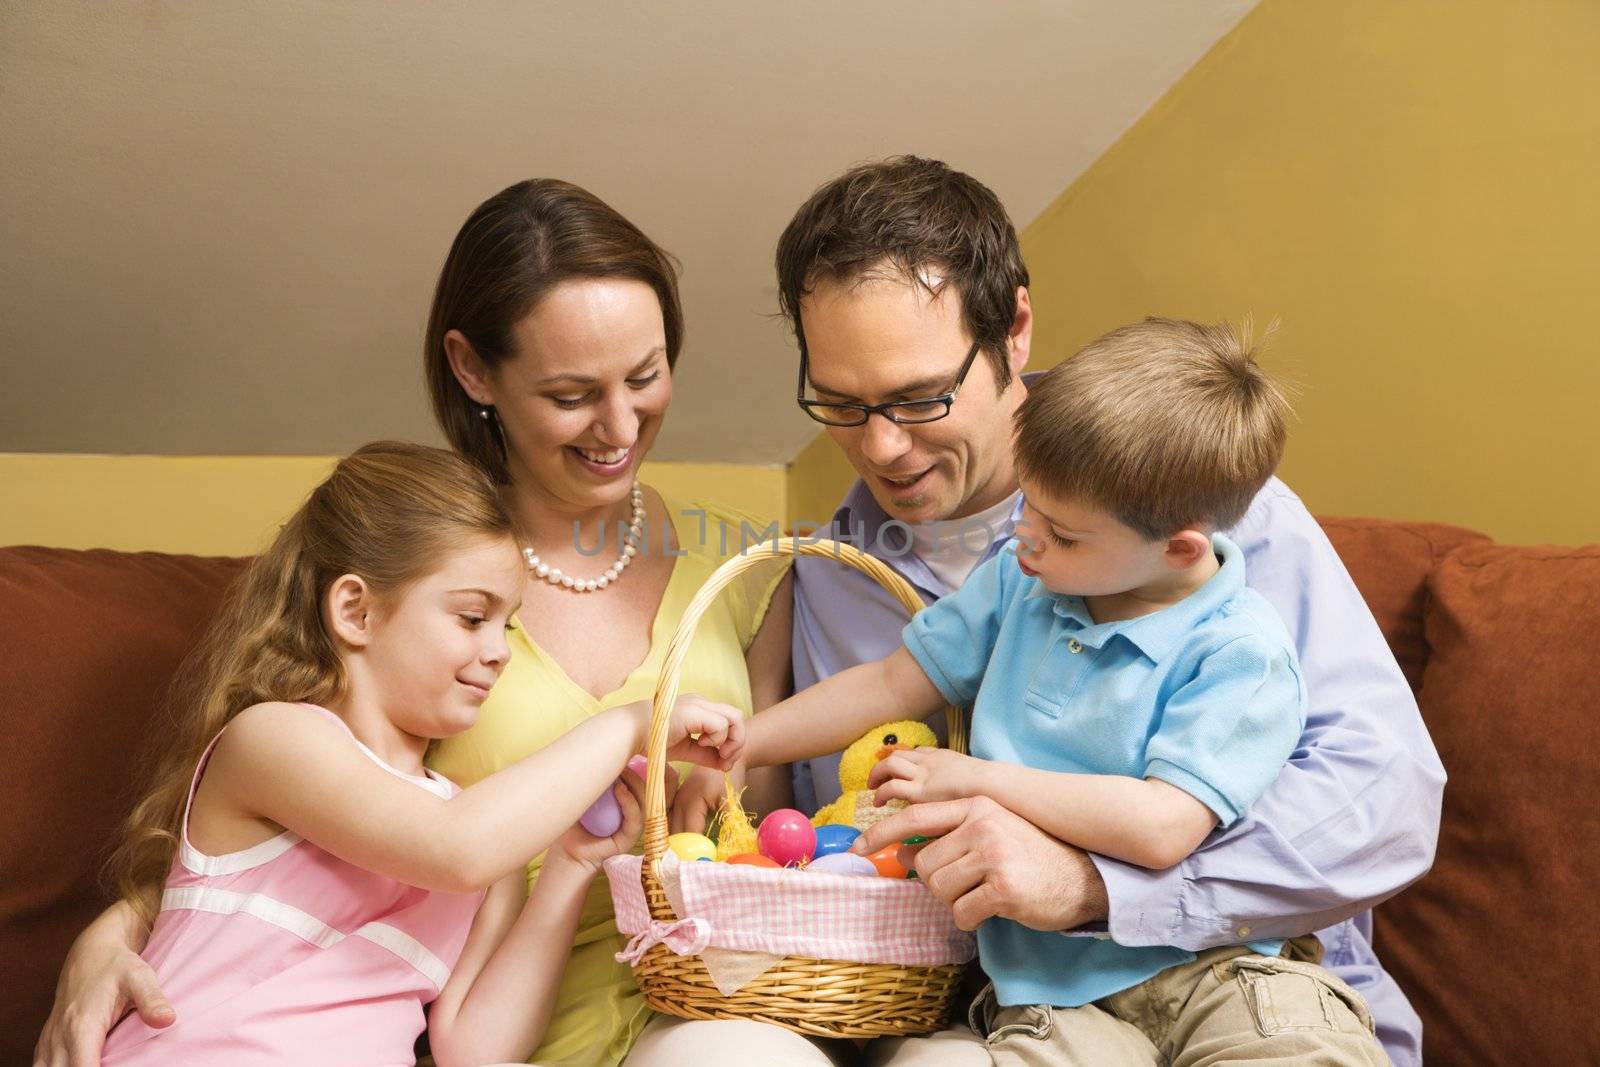 Caucasian family on couch looking at Easter basket.